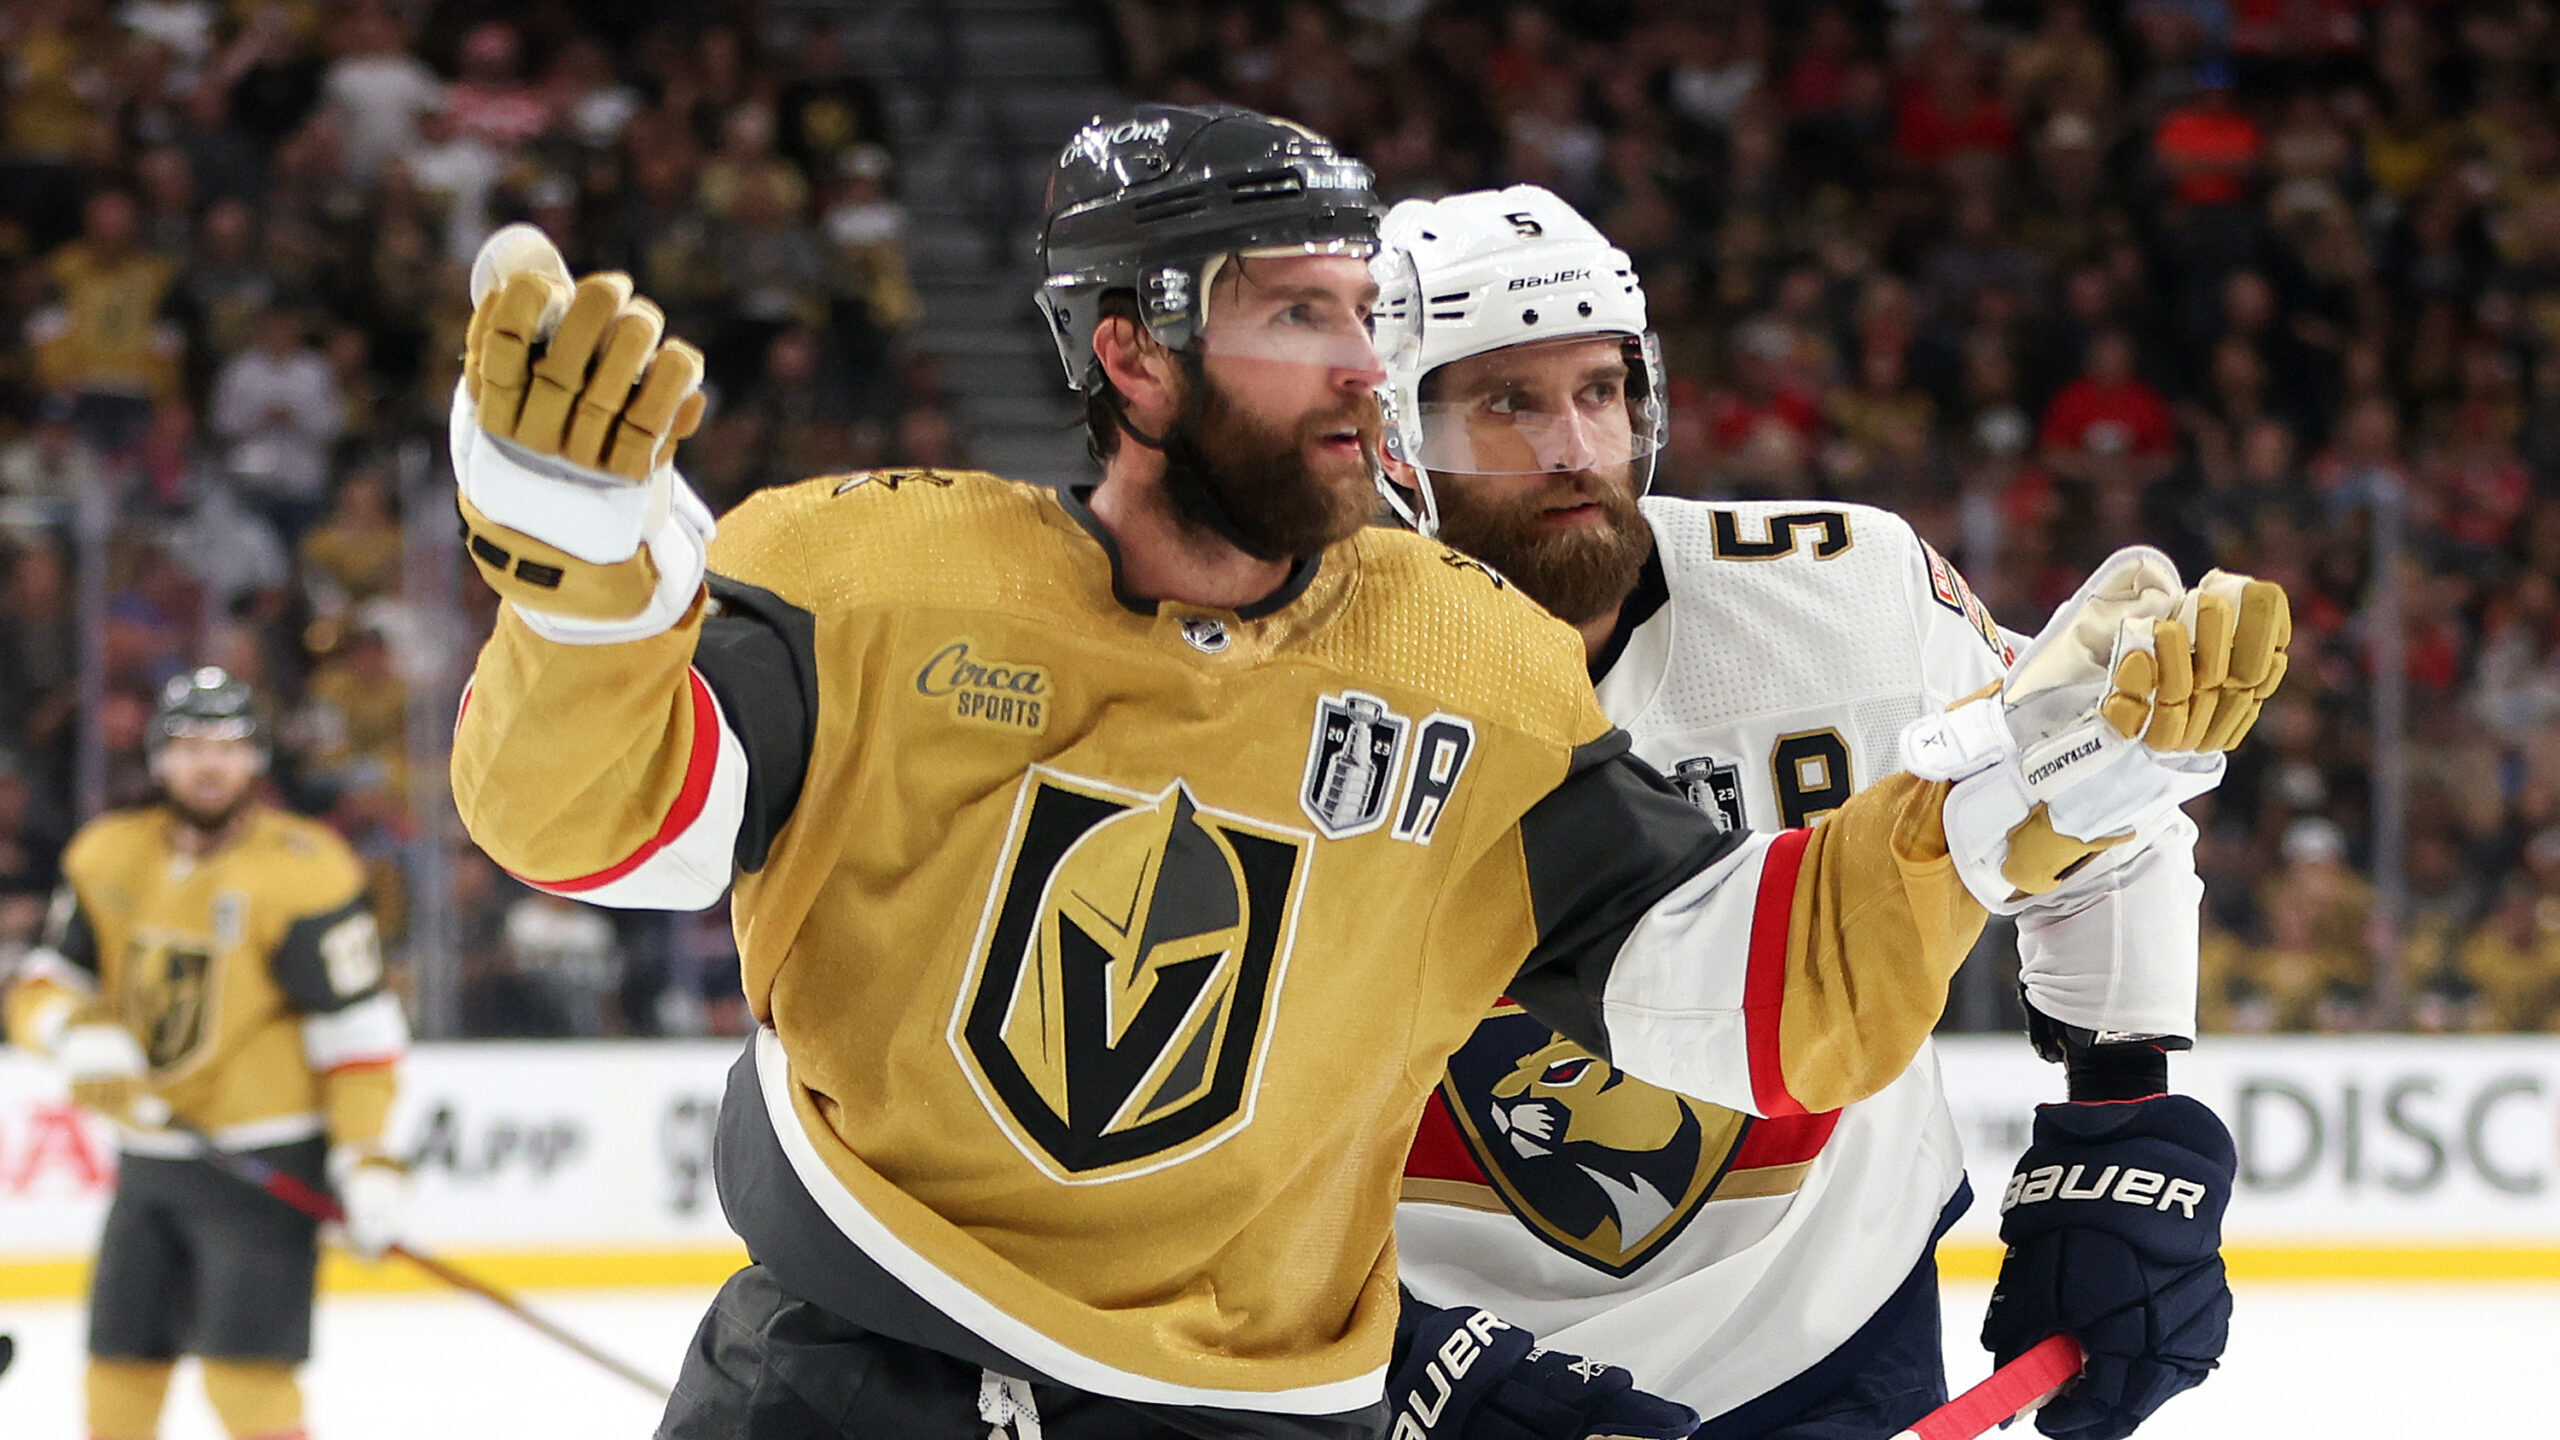 Golden Knights' Alex Pietrangelo Gives New Meaning To Sacrifice, On And Off The Ice